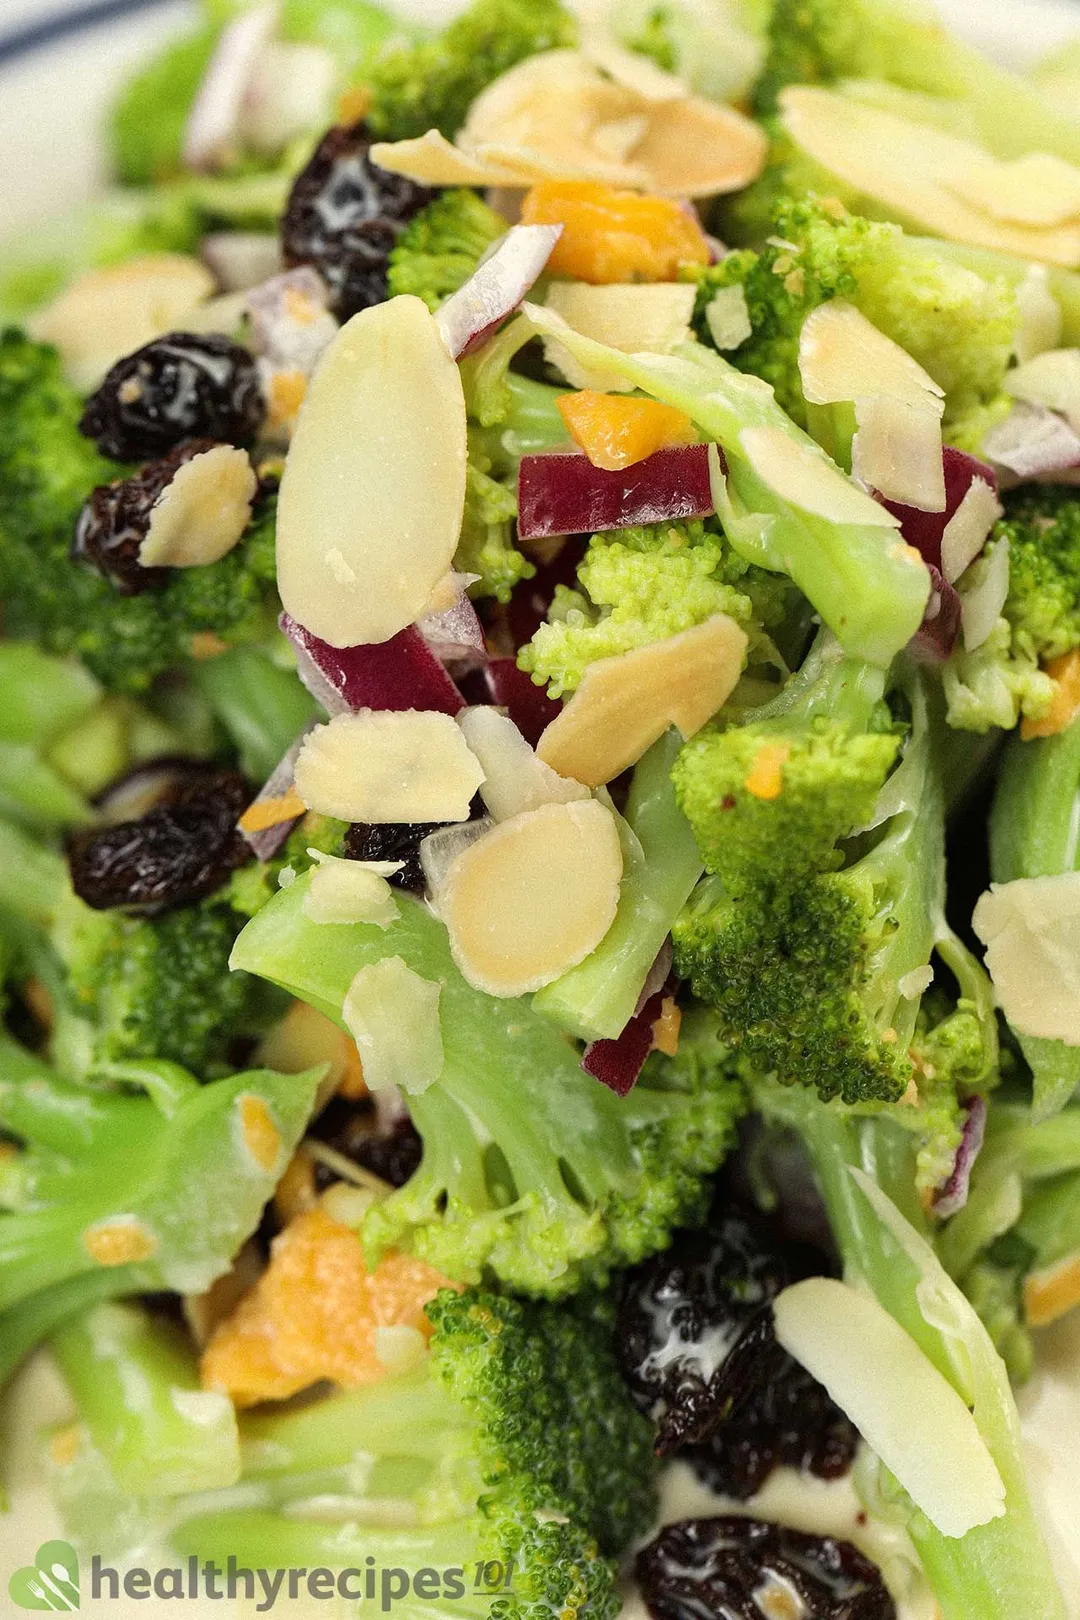 A close-up shot of a broccoli raisin salad, consisting of broccoli florets, raisins, sliced almond, and diced red onion